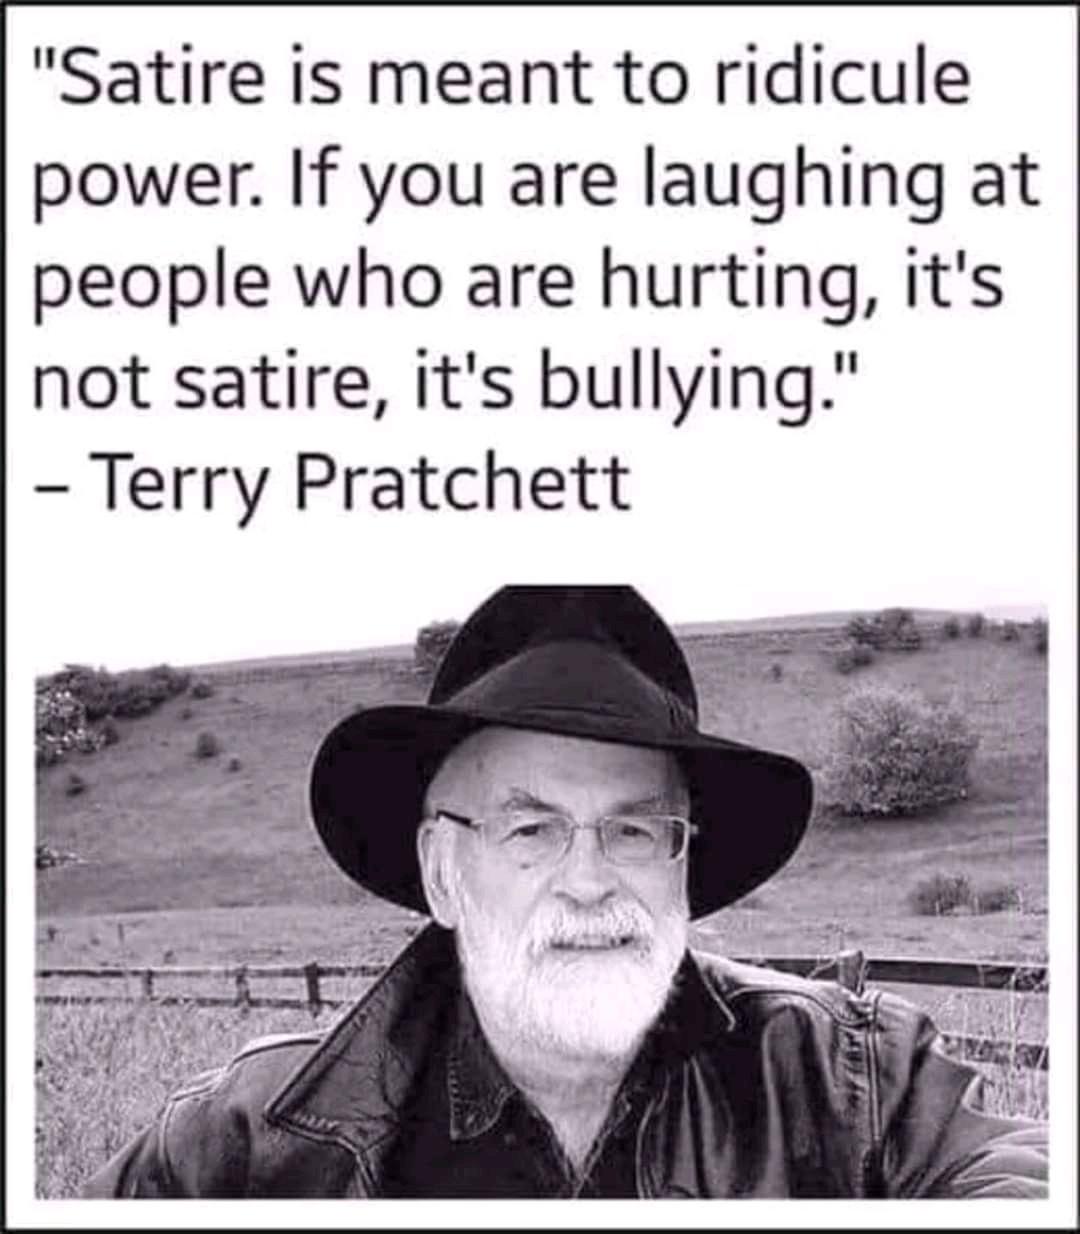 monday morning randomness - terry pratchett satire - "Satire is meant to ridicule power. If you are laughing at people who are hurting, it's not satire, it's bullying." Terry Pratchett